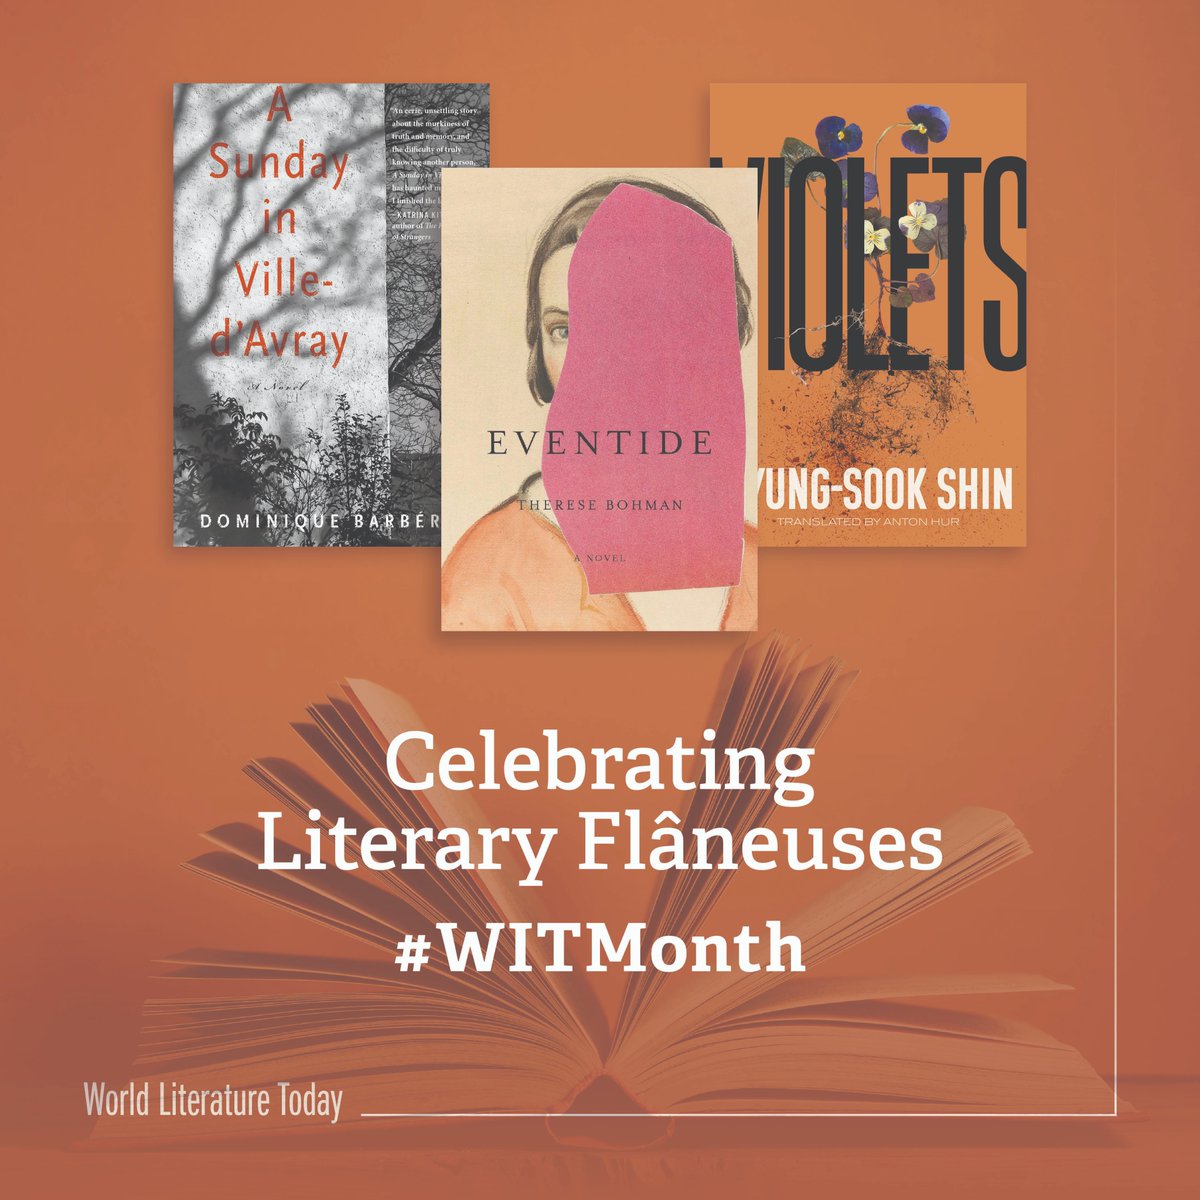 It's August, which means it's time for #WITMonth!